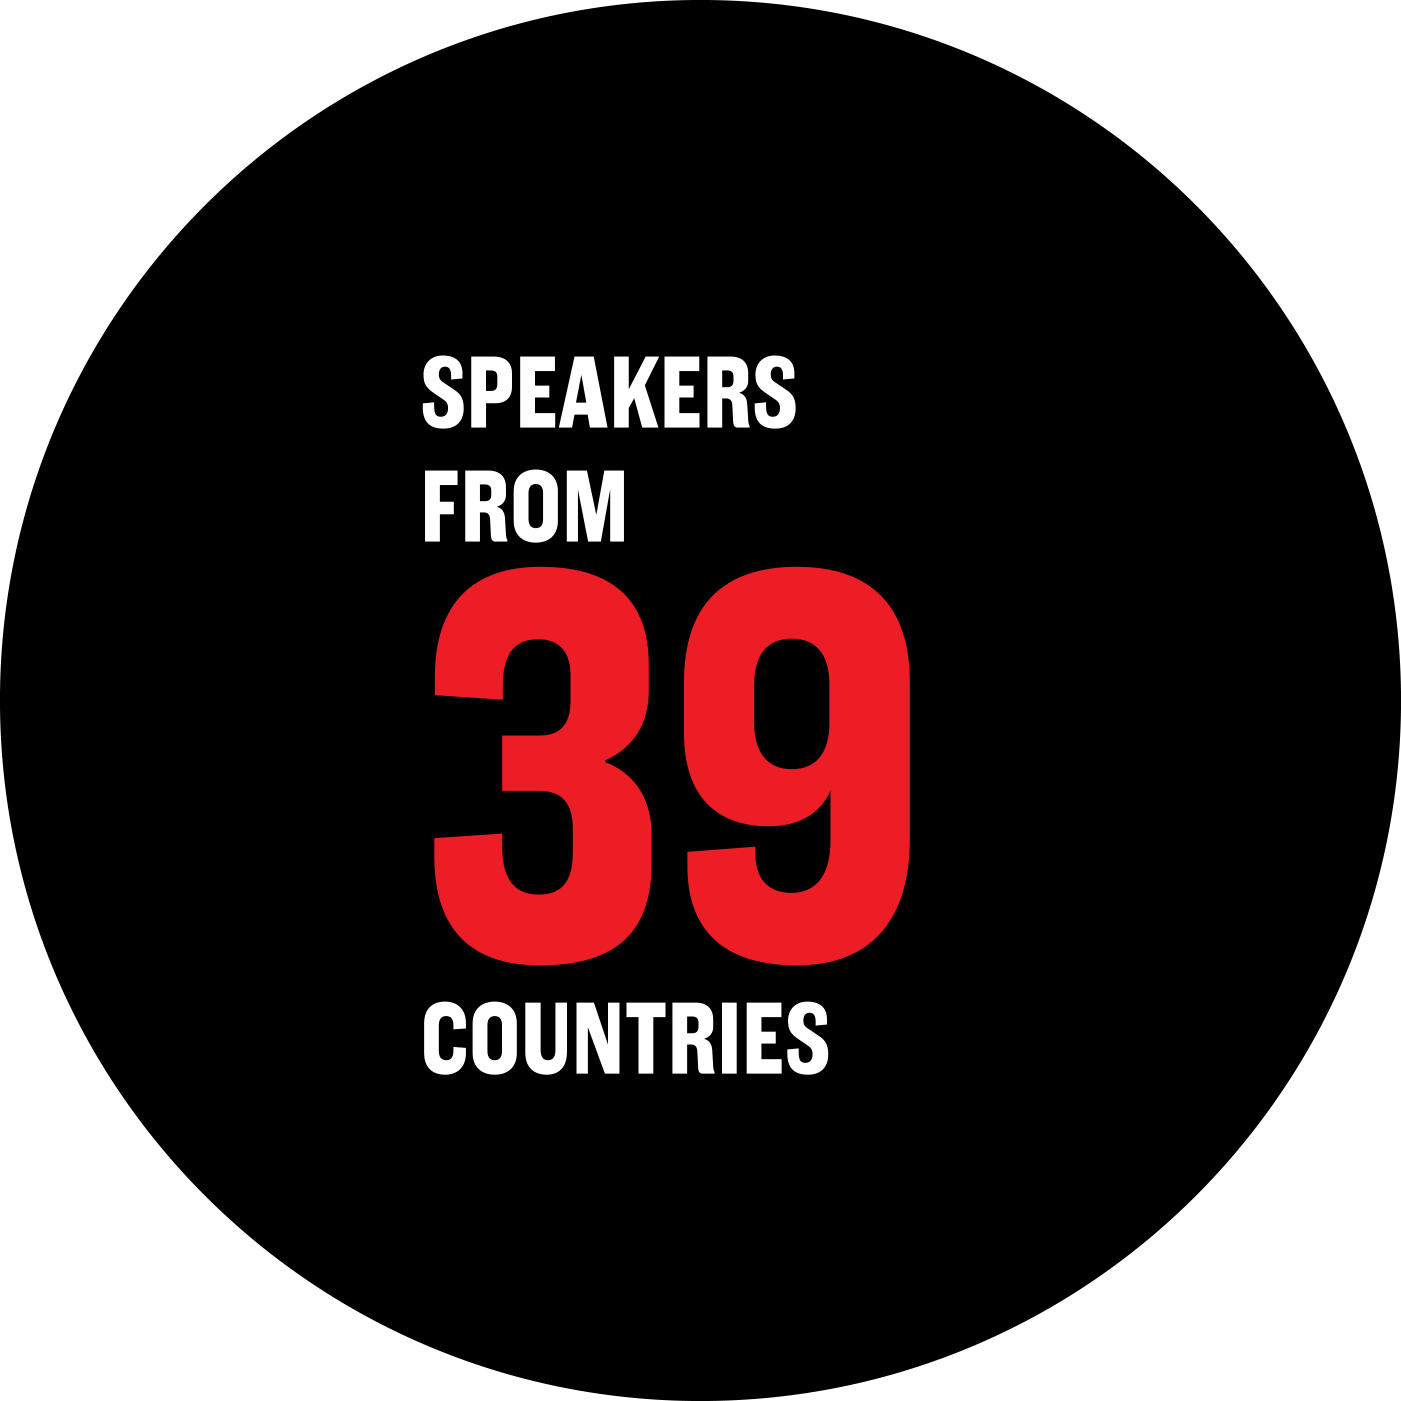 Speakers from 39 countries